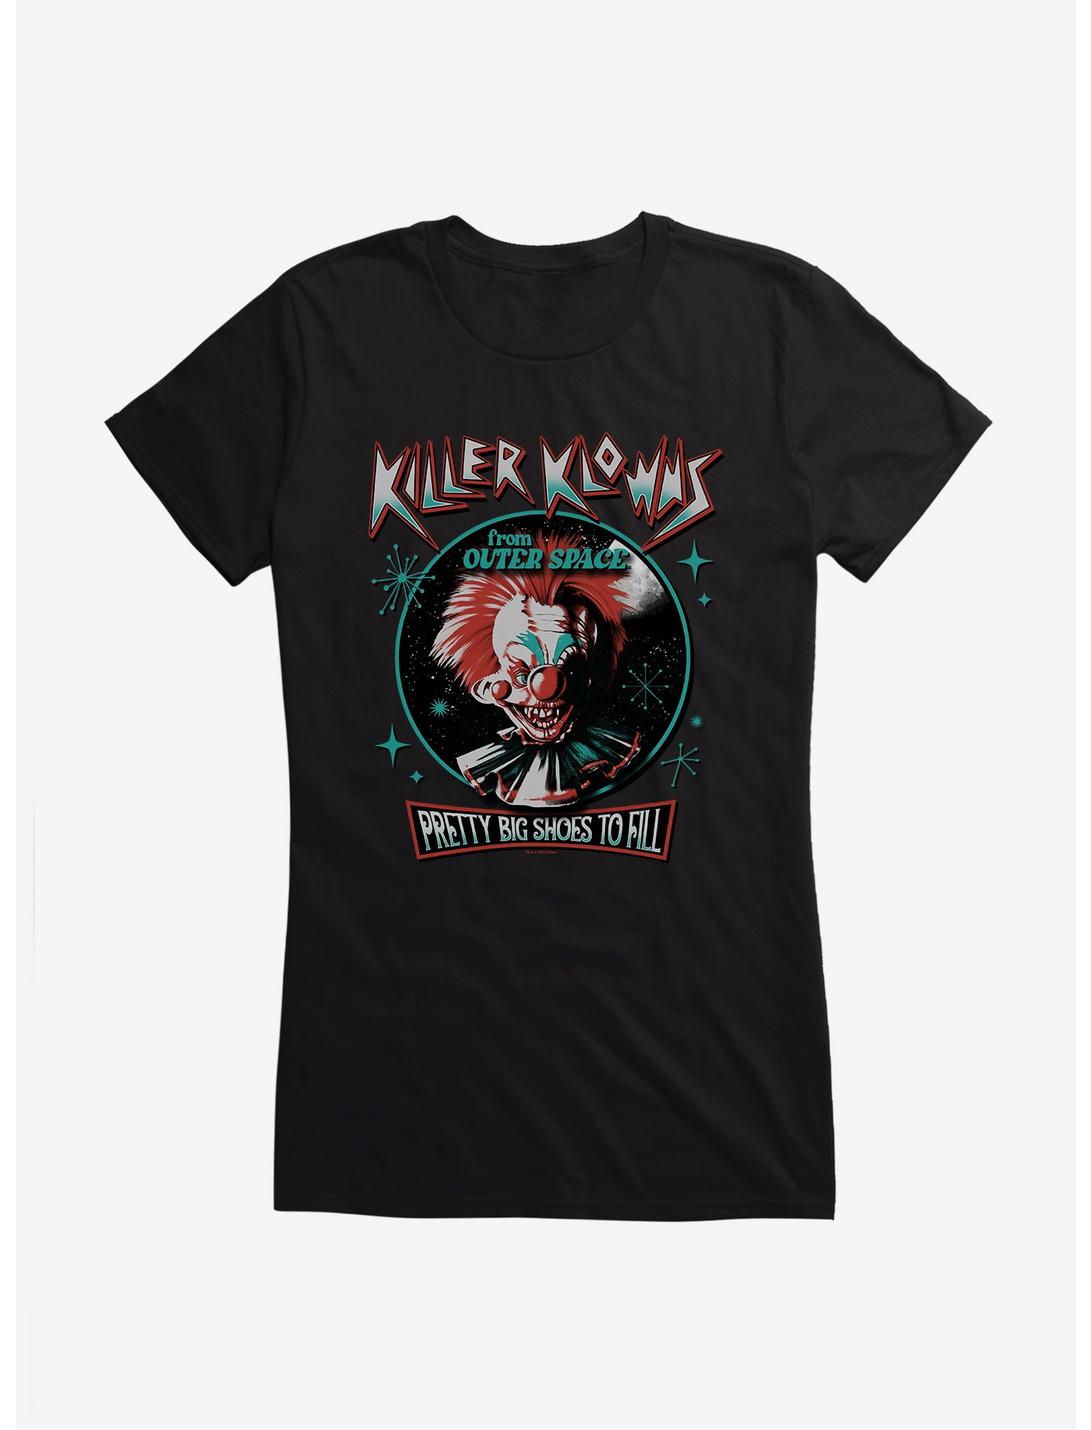 Killer Klowns From Outer Space Pretty Big Shoes To Fill Girls T-Shirt, BLACK, hi-res